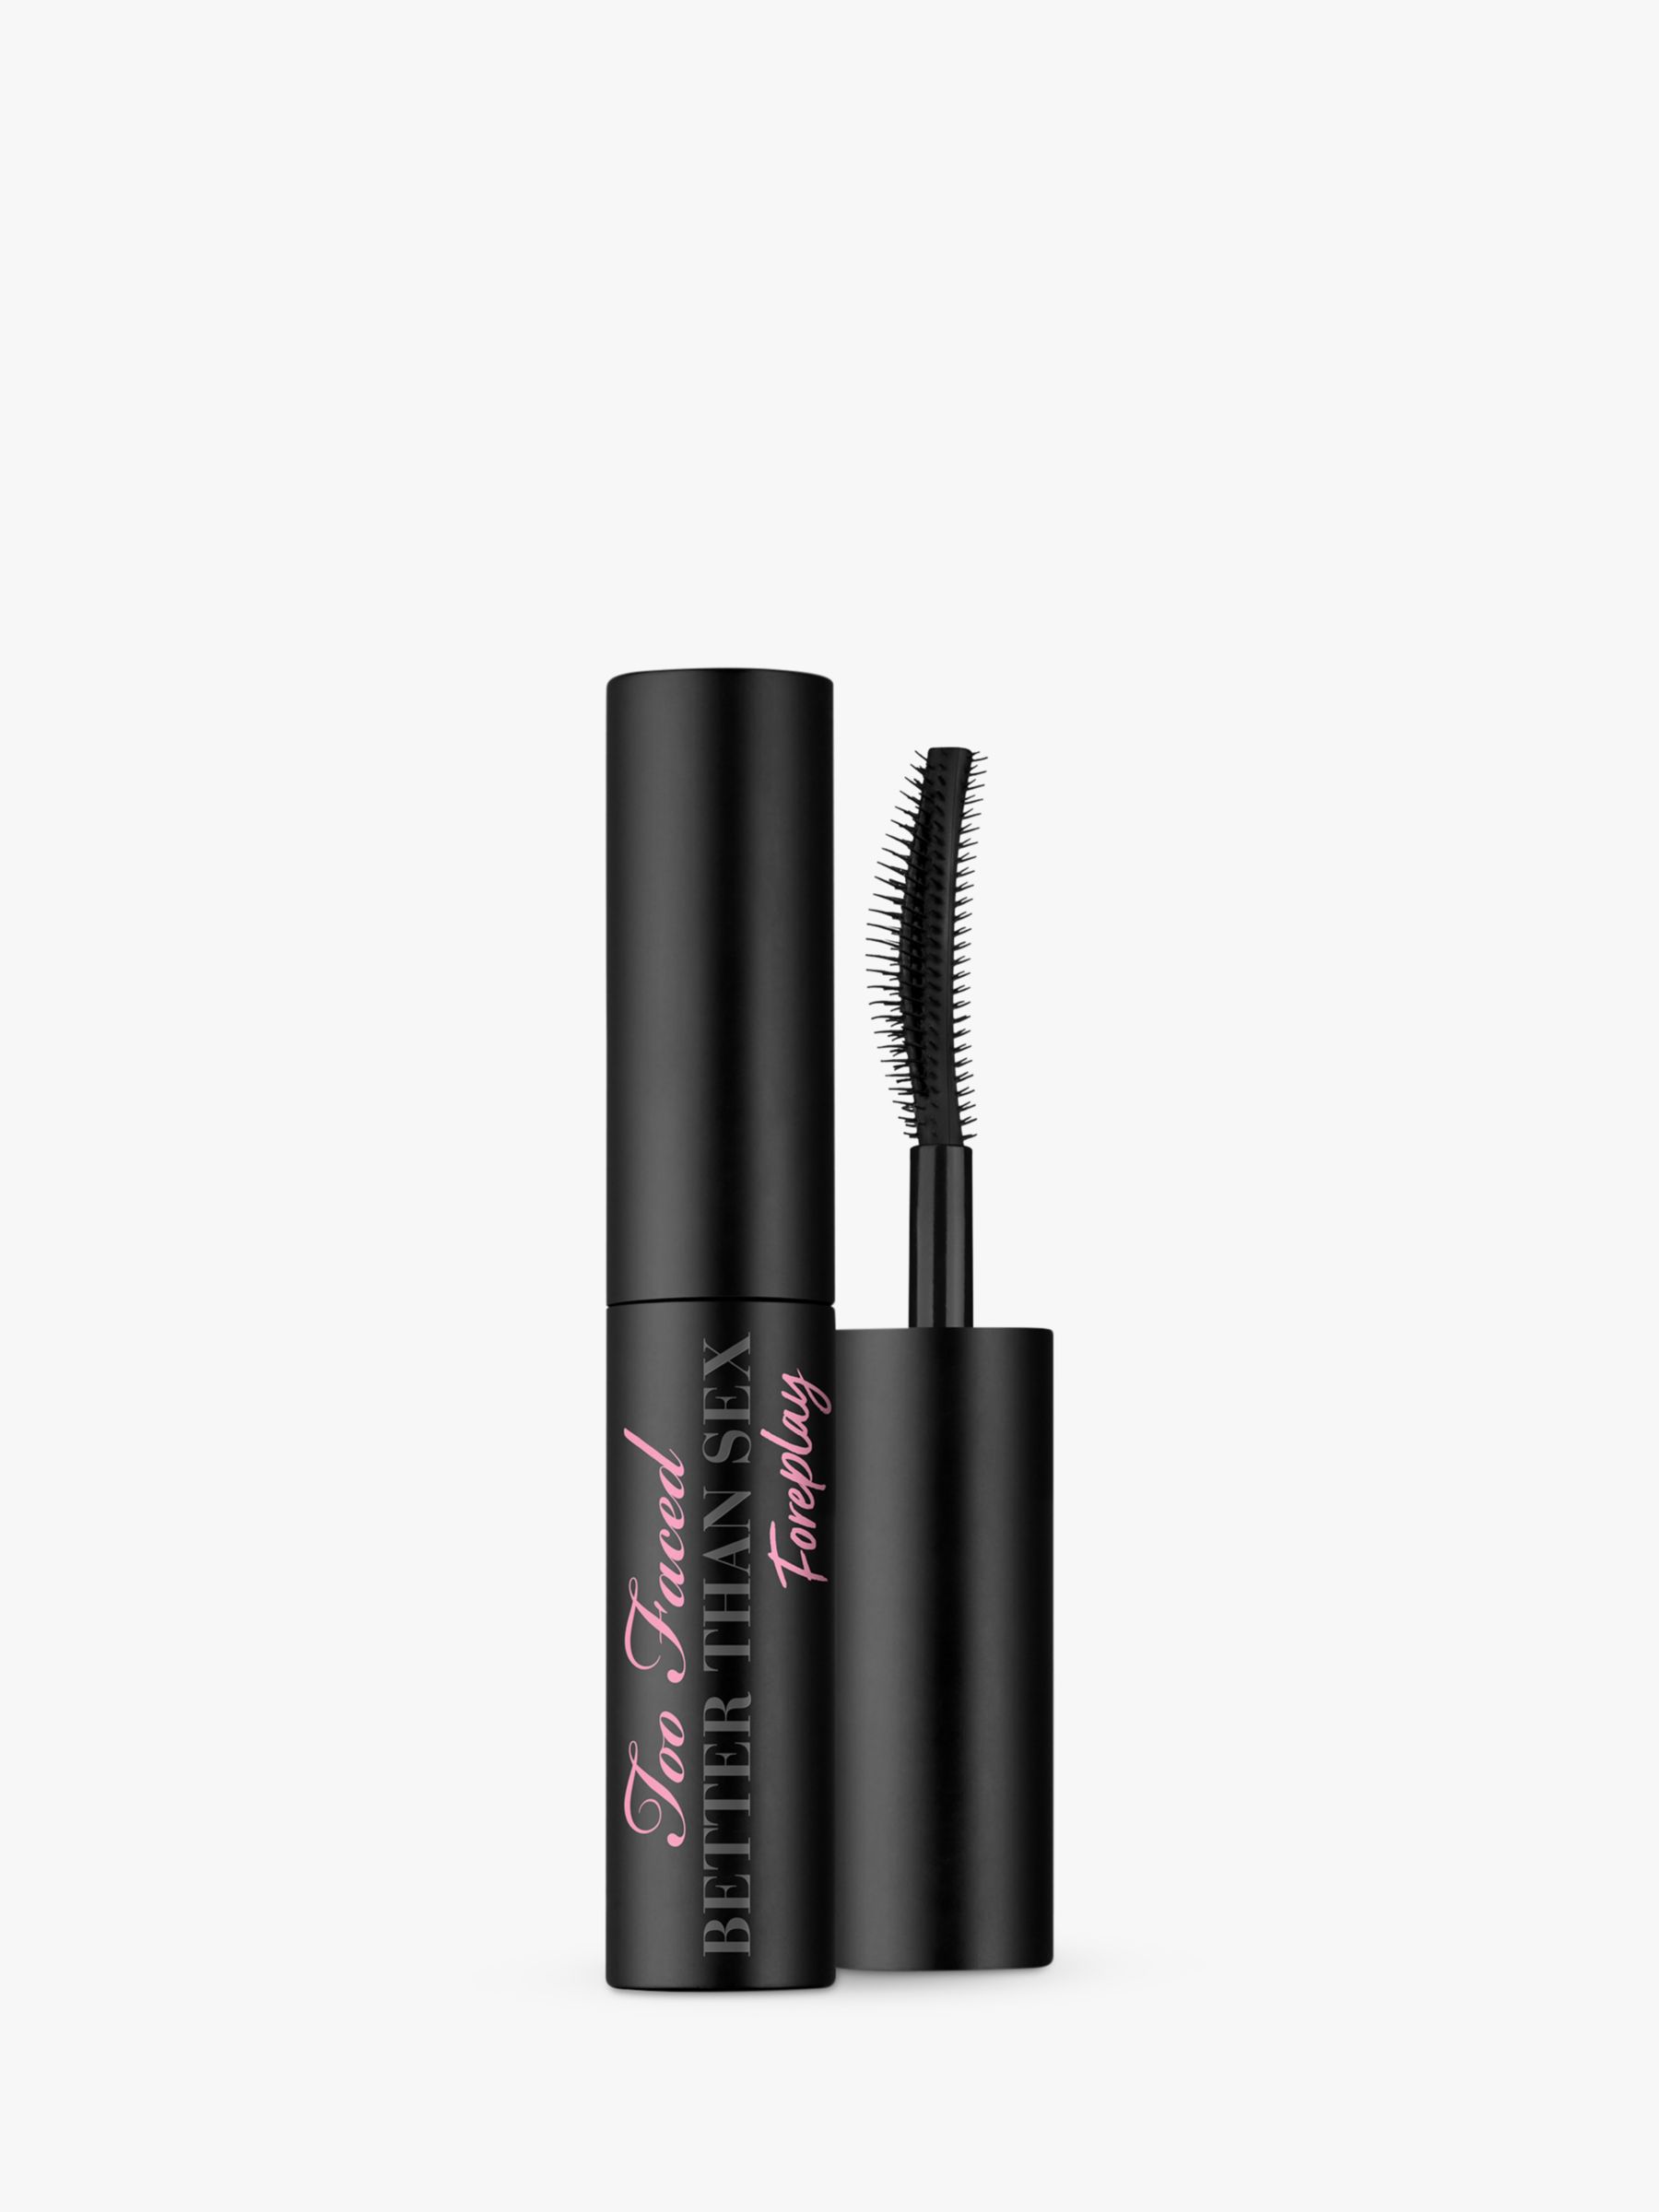 Too Faced Better Than Sex Foreplay Lash Lifting and Thickening Mascara Primer, Travel Size, 4ml 1